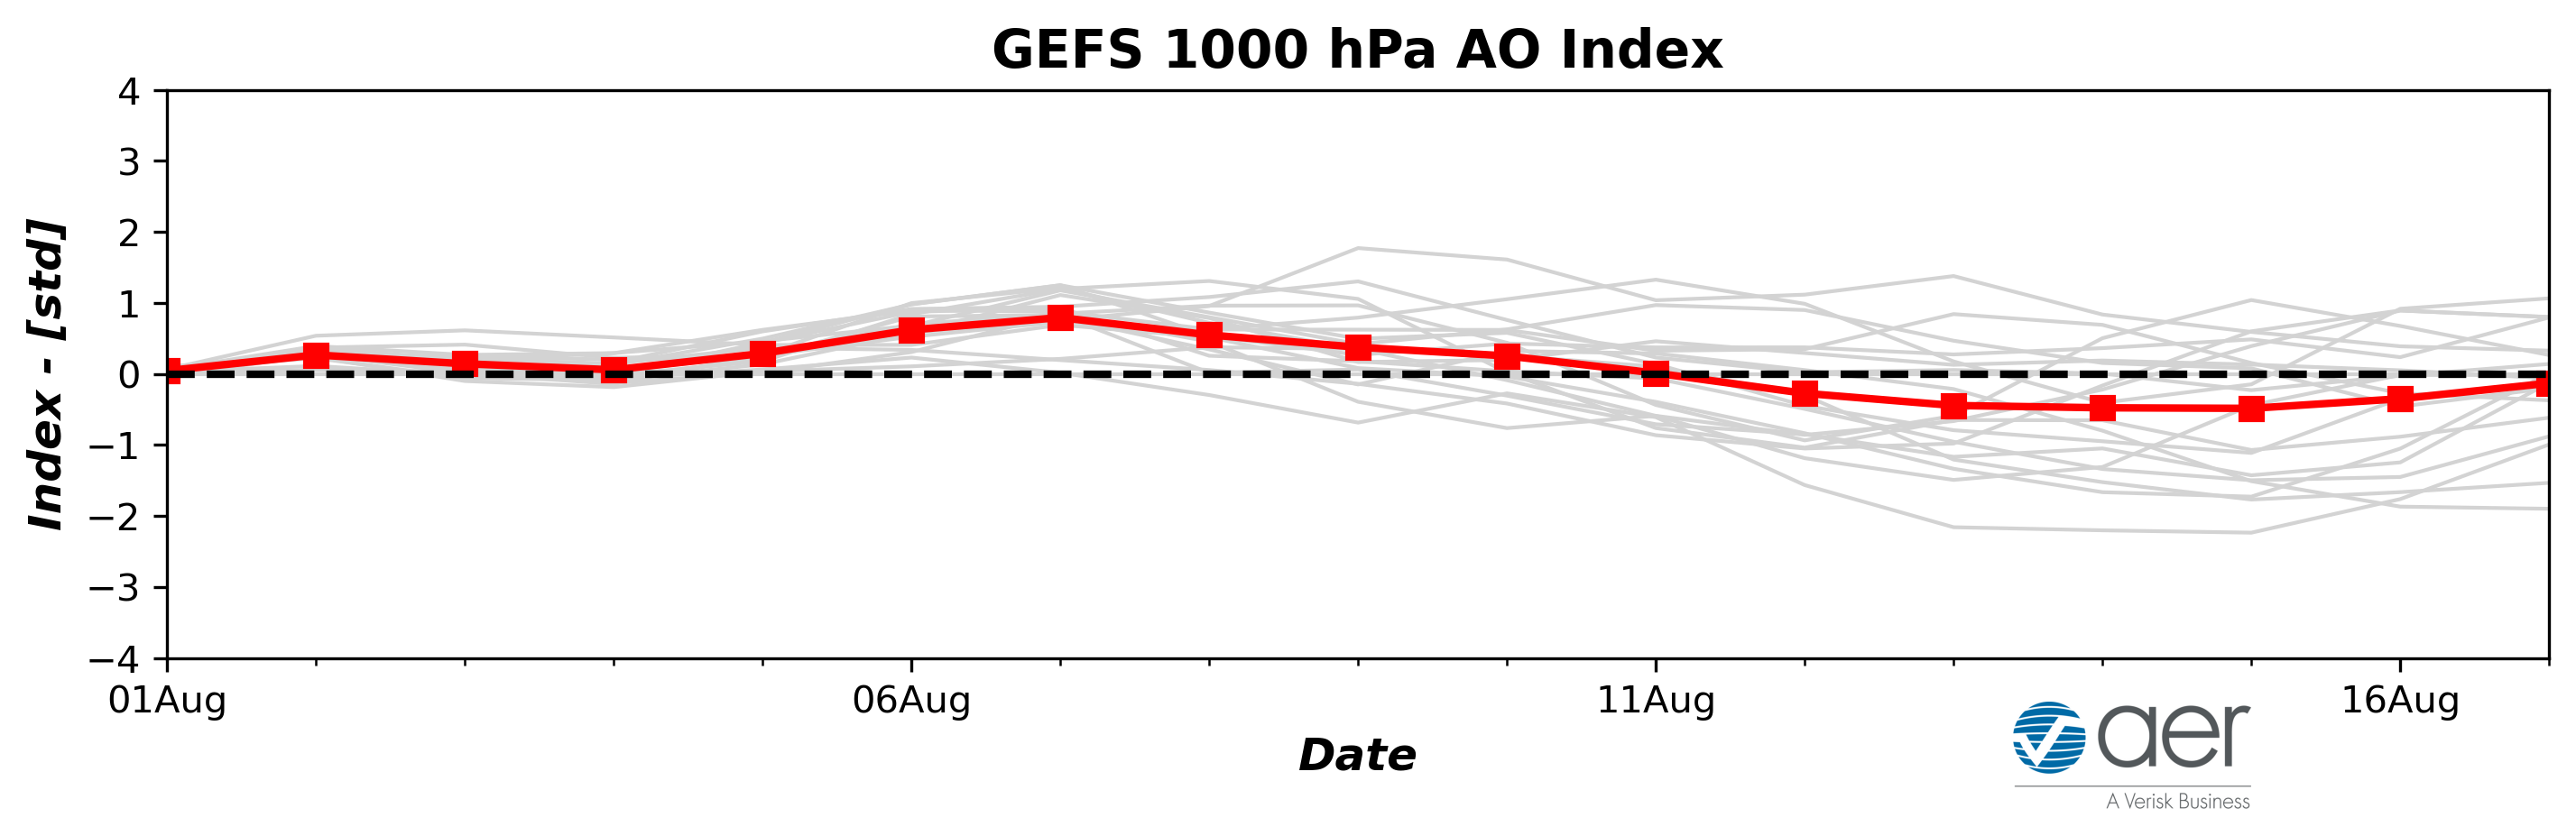 GEFS_AOIndex_1000hPa_2022080100.png